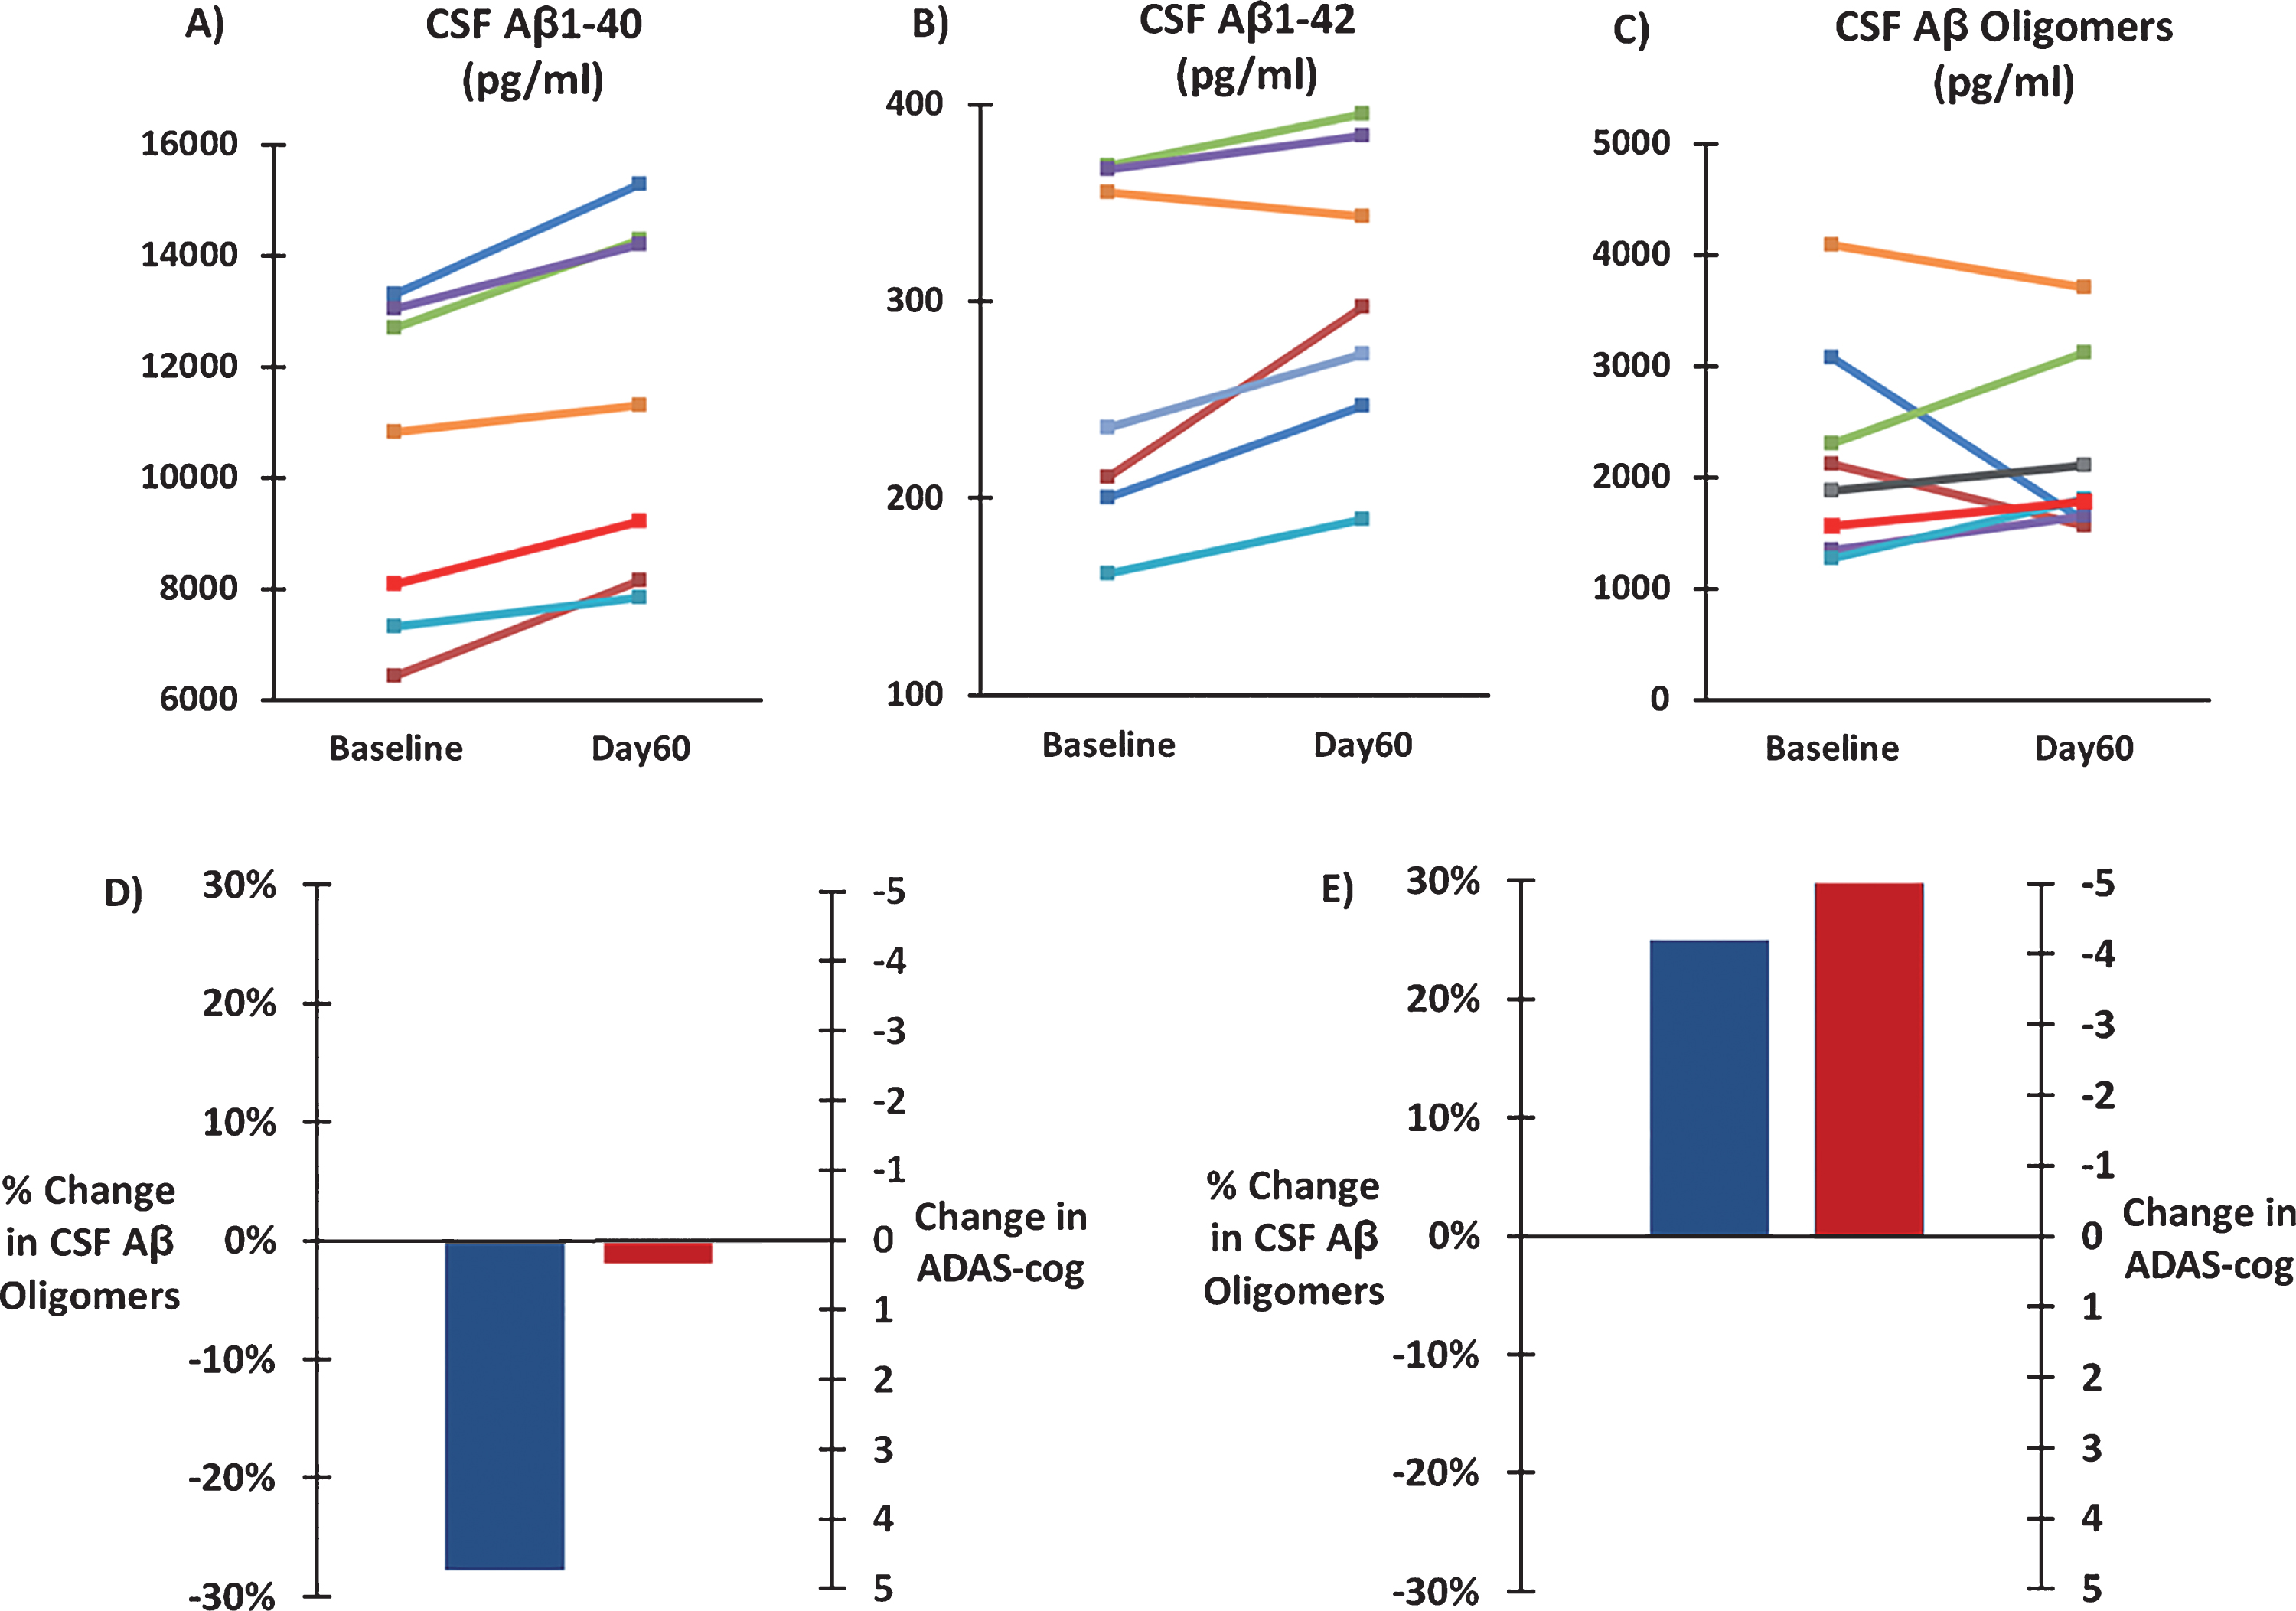 Effects of TEMT administration on CSF levels of soluble Aβ1-40 (A), soluble Aβ1-42 (B), and oligomeric Aβ (C) following 2 months of TEMT (Day60) compared to levels at Baseline for all individual subjects. D) For subjects that showed a decrease in CSF Aβ oligomers following 2 months of TEMT (n = 3), combined performance on the ADAS-cog was stable on Day60 compared to Baseline. For subjects that showed an increase in CSF Aβ oligomer levels after 2 months of TEMT (n = 5), a sizable 5+ point improvement in their combined ADAS-cog score was present on Day60 versus Baseline.